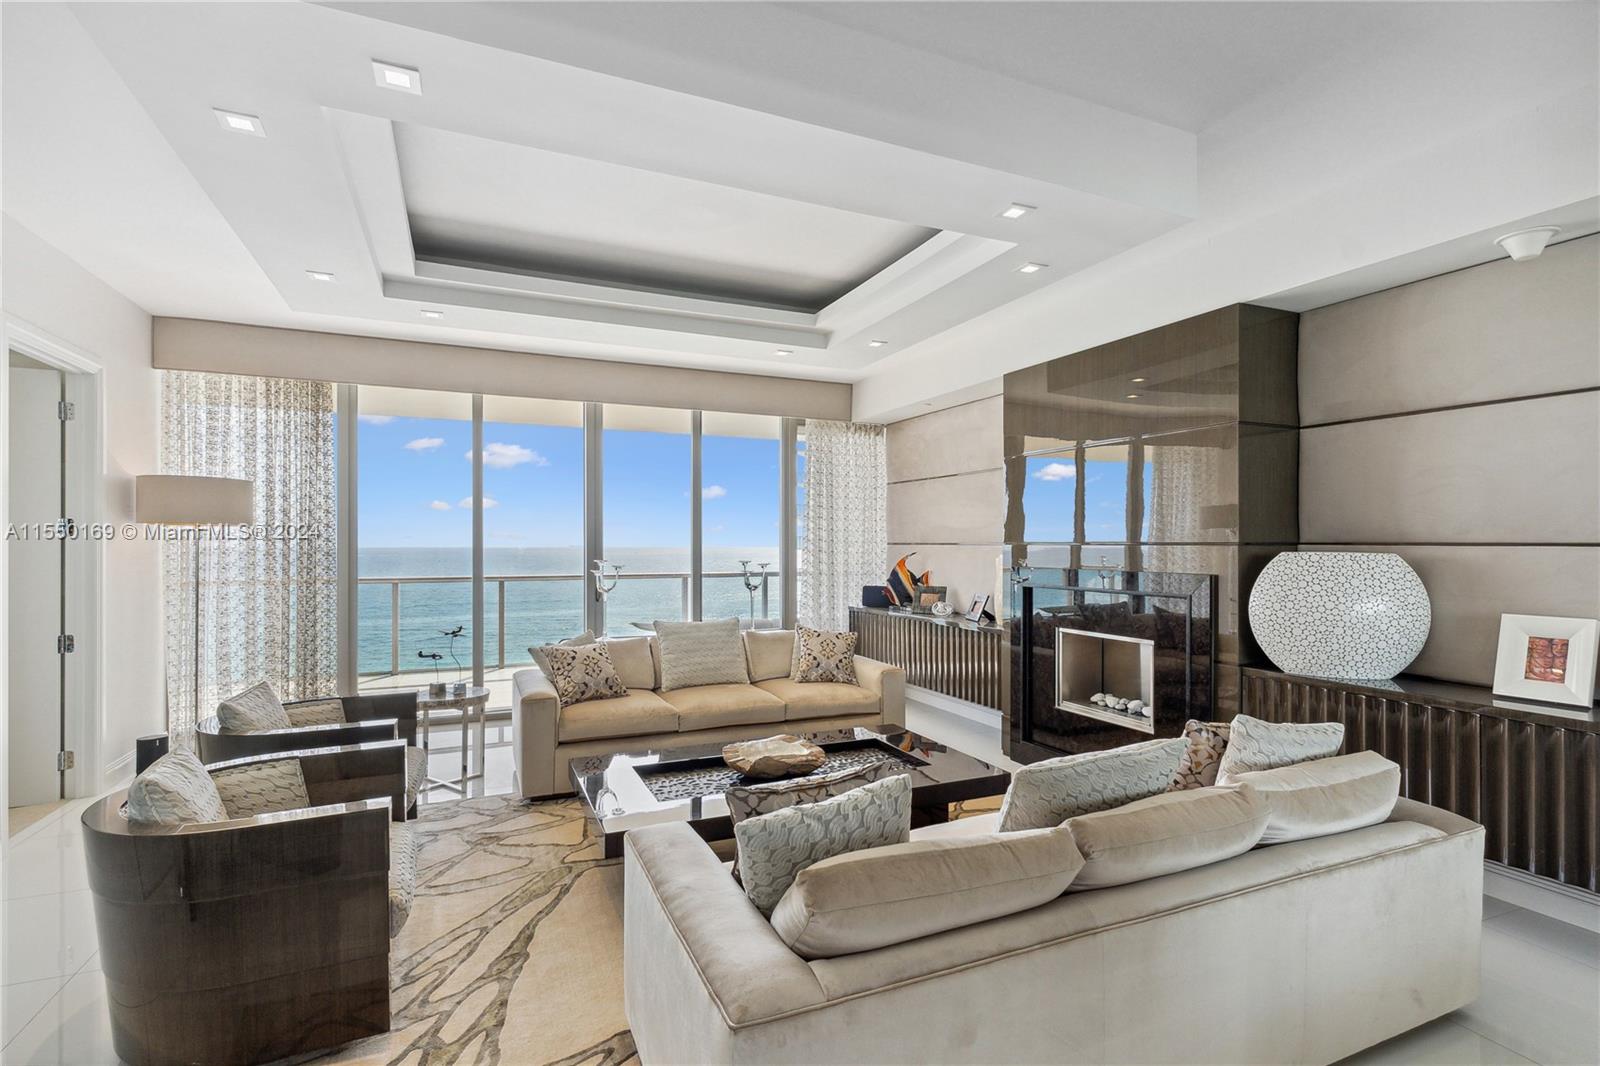 Welcome to 1102, a remarkable property offered turnkey and thoughtfully decorated. 
This 3 bedroom 3.5 bathroom fractures  a flow-through floor plan with direct views to the ocean as well as the intracoastal water, to enjoy both sunrise and sunset from the expansive terraces. 
Located across from the renowned Bal Harbour Shops, the St Regis brand is synonym of a true luxury experience with the exclusive 5 star butler service, multiple exquisite dining options, 3 swimming pools, 3 gyms, full service spa and beach service.